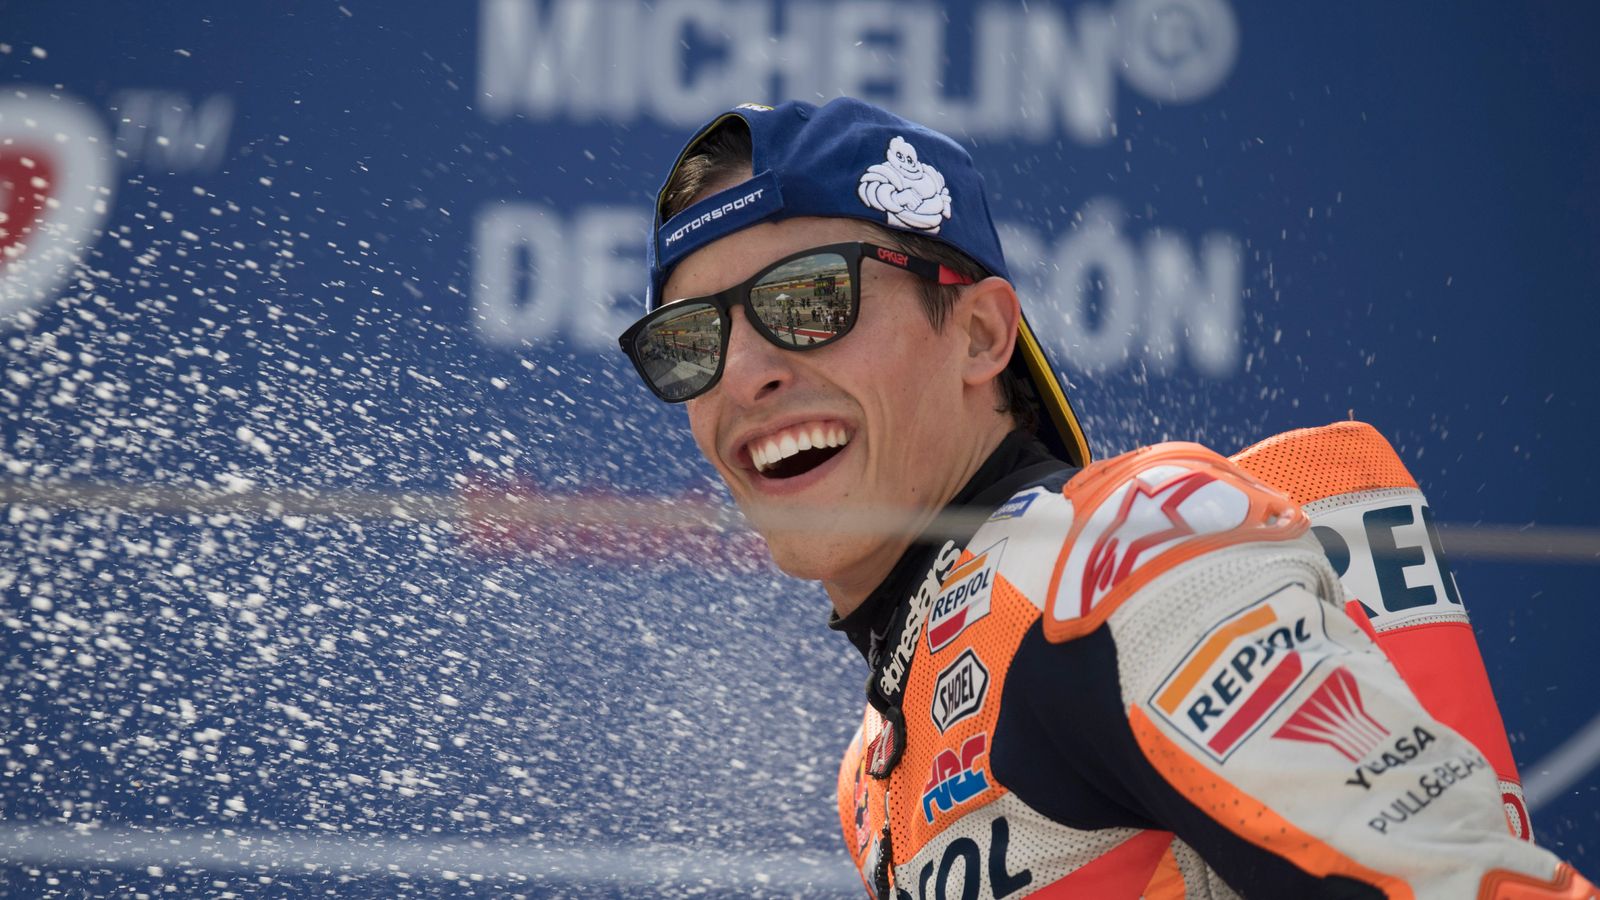 Moto GP: Marc Marquez comes out of hospital to win sixth world